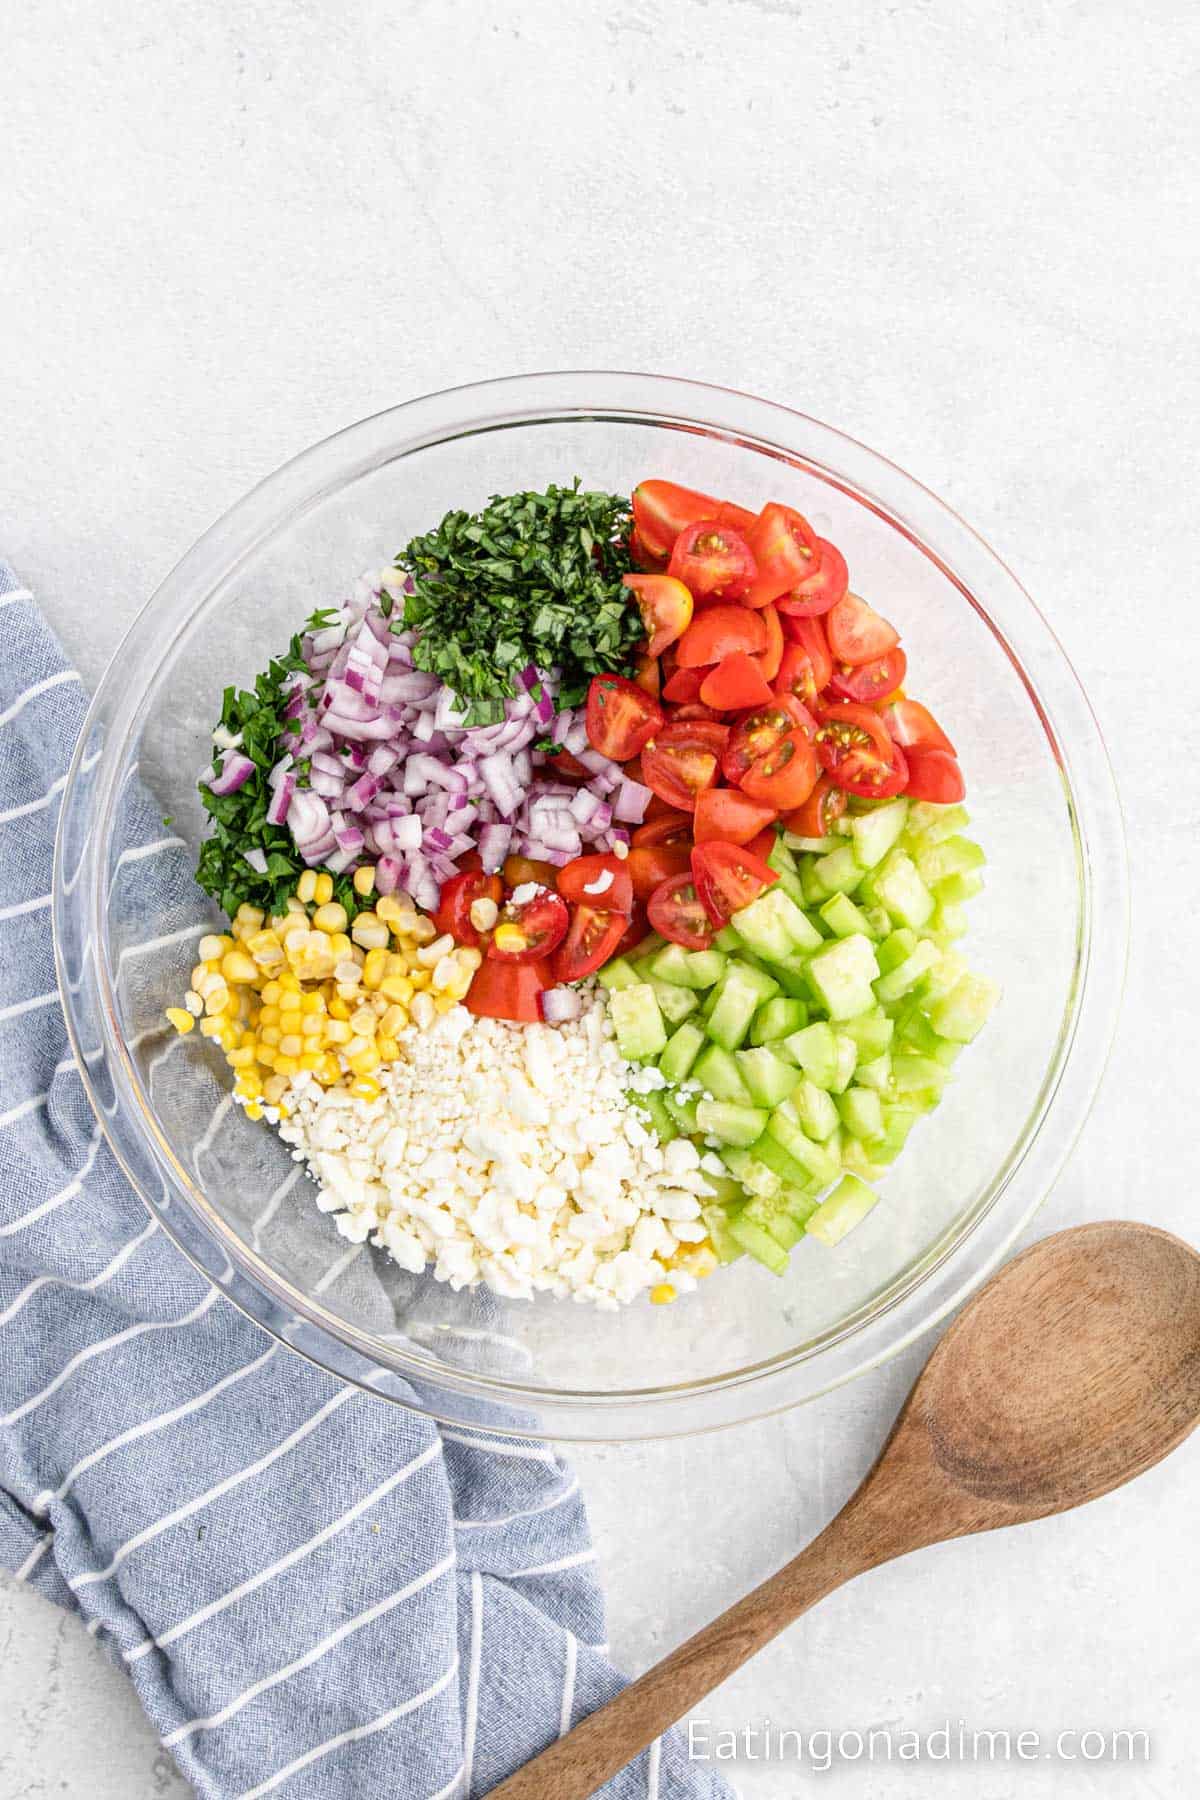 Combining the fresh vegetables and cheese together in a bowl